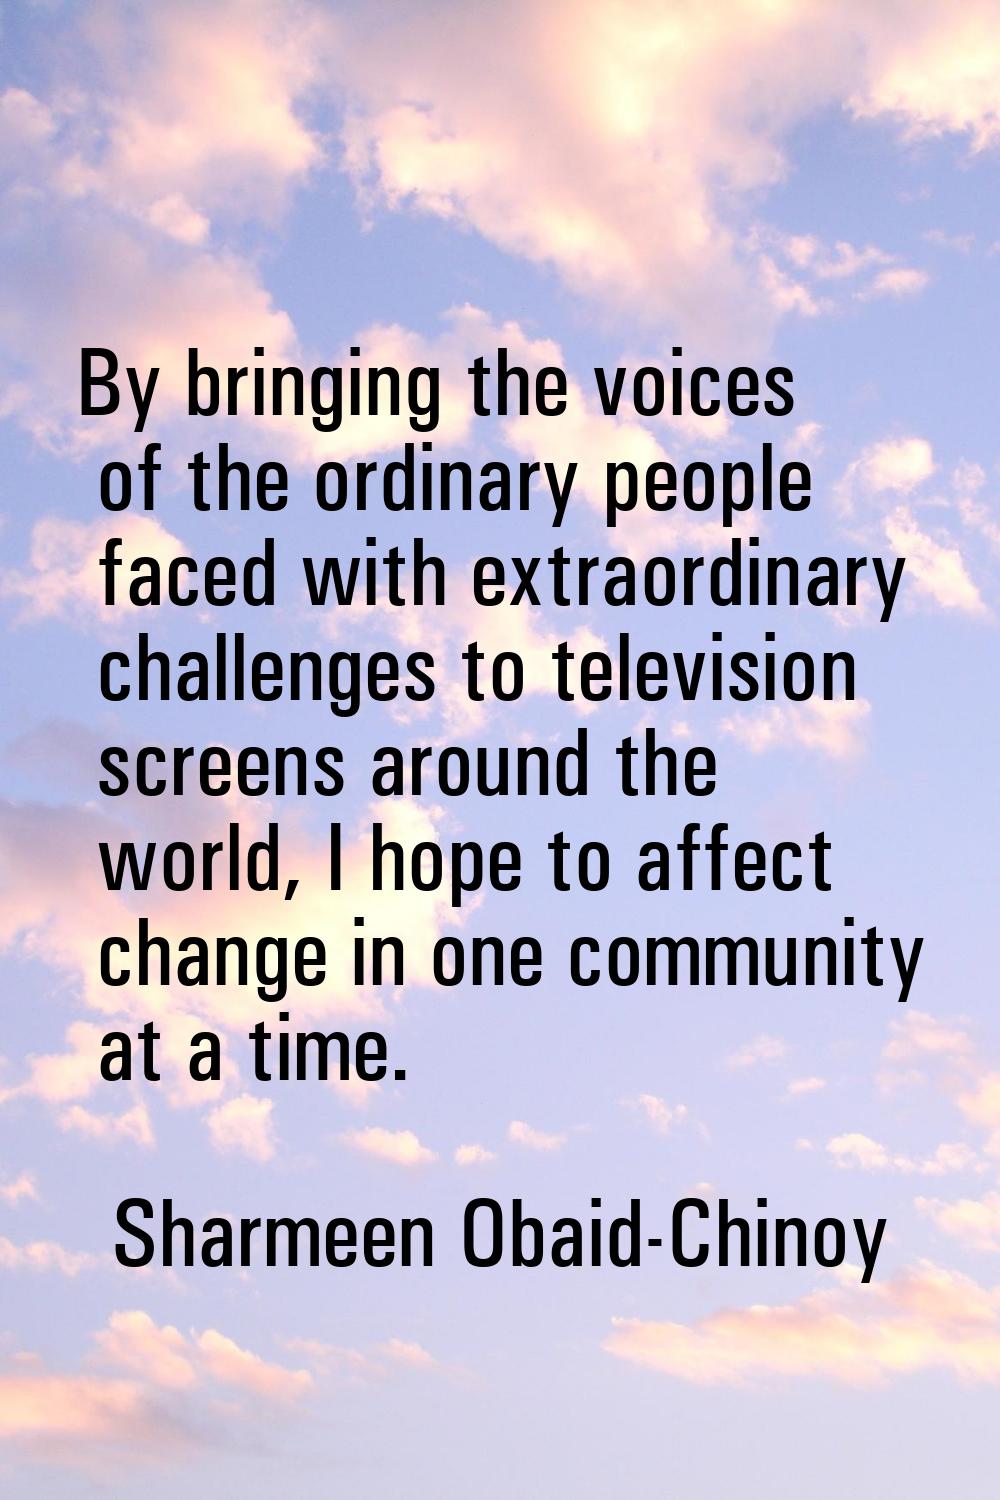 By bringing the voices of the ordinary people faced with extraordinary challenges to television scr